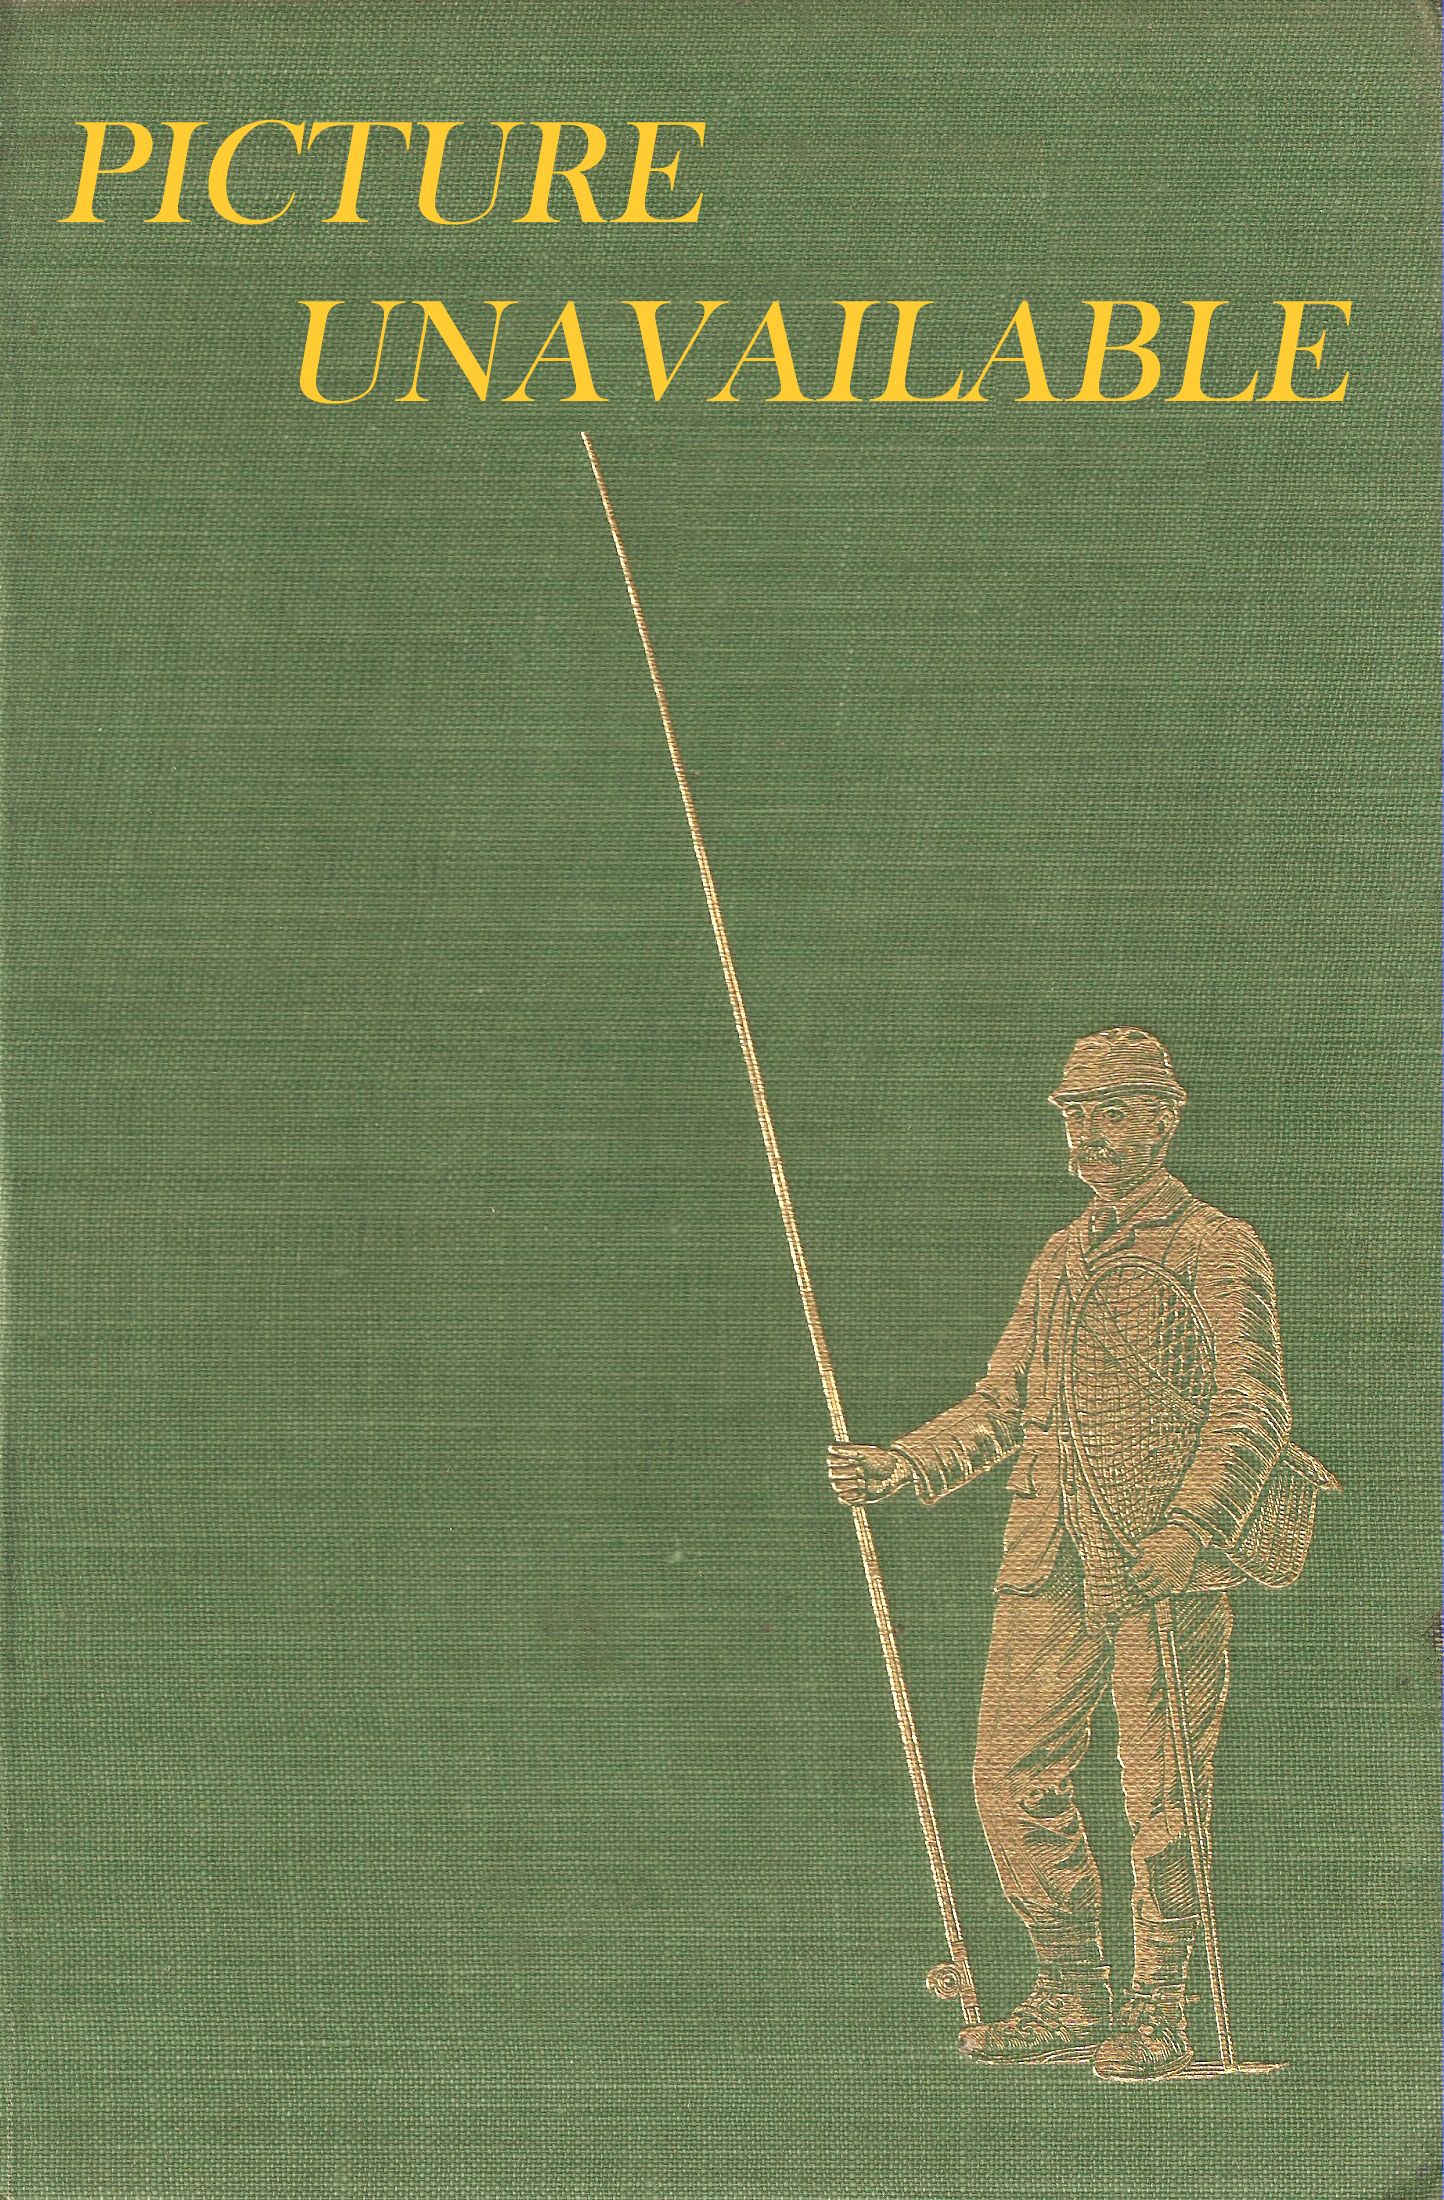 THE ART OF SEA TROUT FISHING. By Charles C. McLaren. Angling Paperbacks  No. 3.